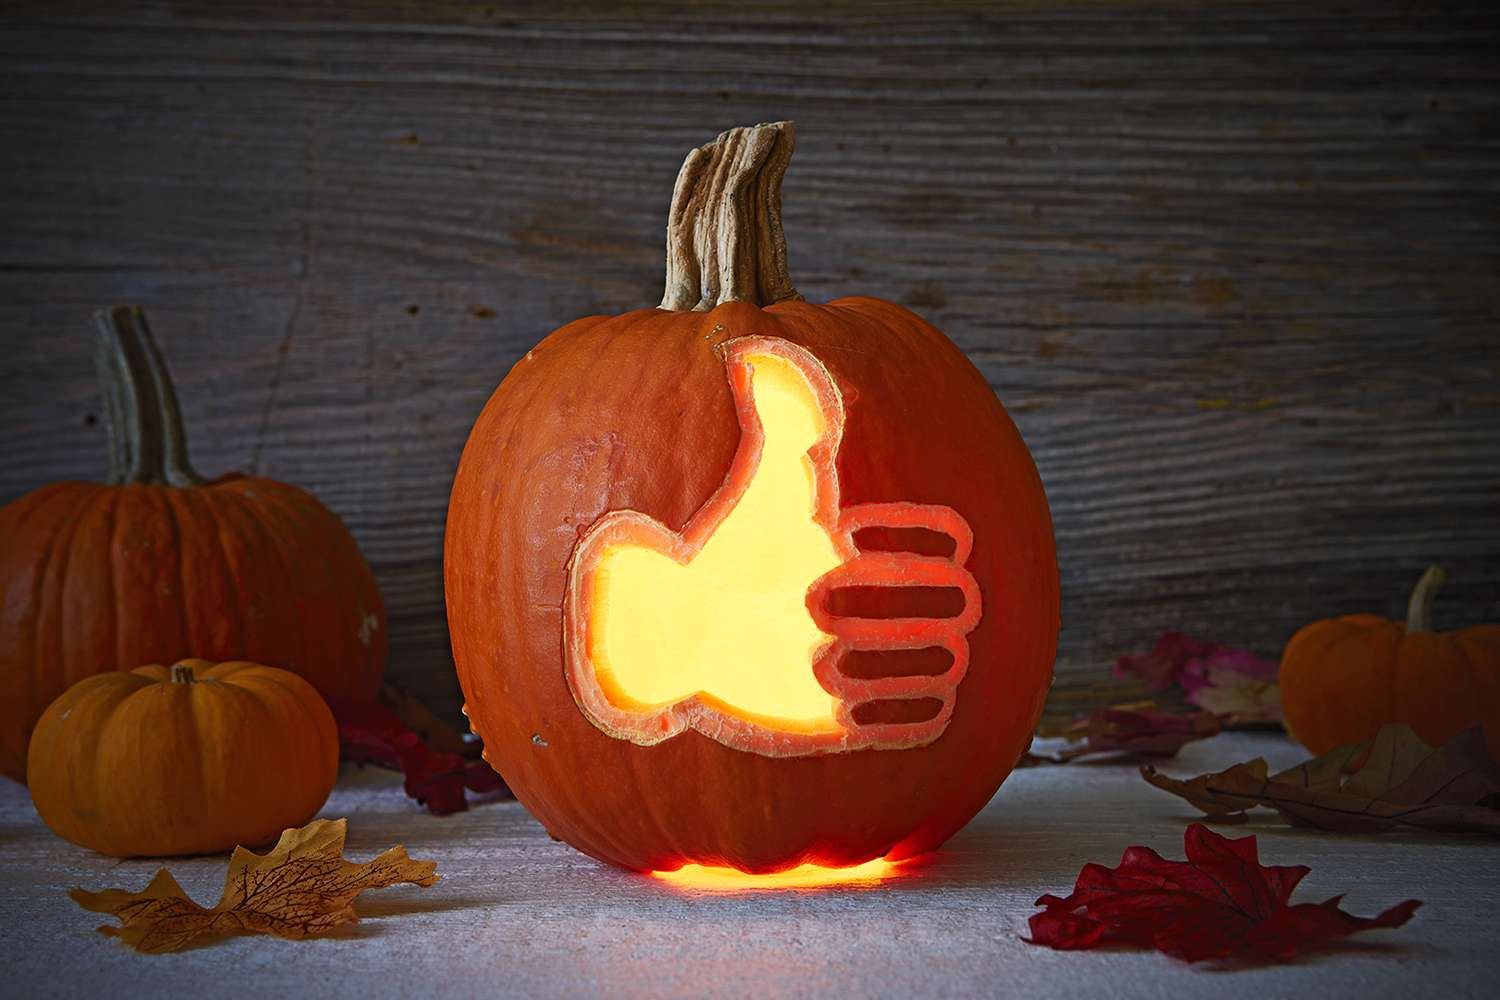 thumbs up symbol carved into lit-up pumpkin